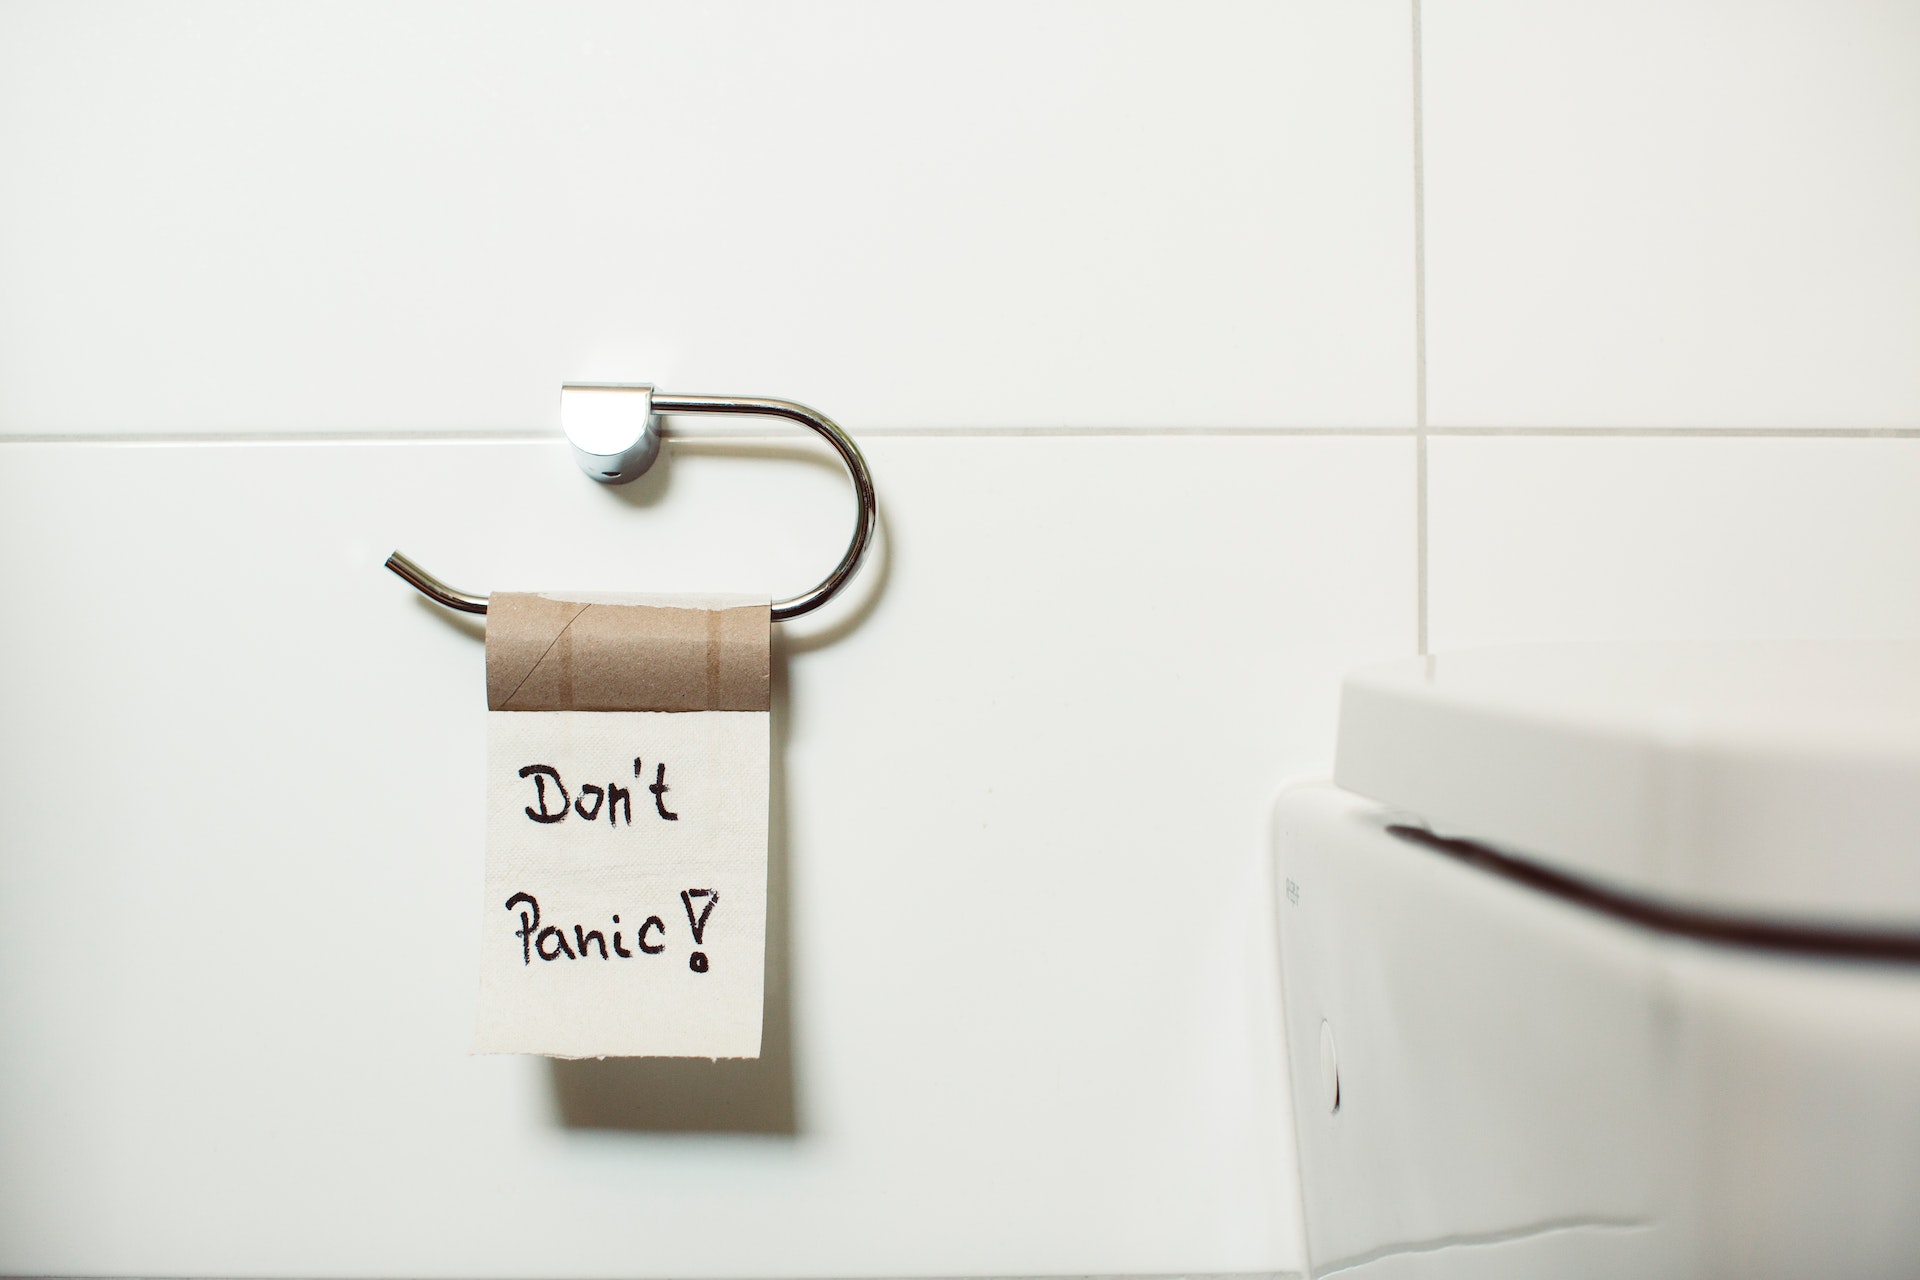  A photo of a toilet roll with ‘Don’t Panic’ written on it